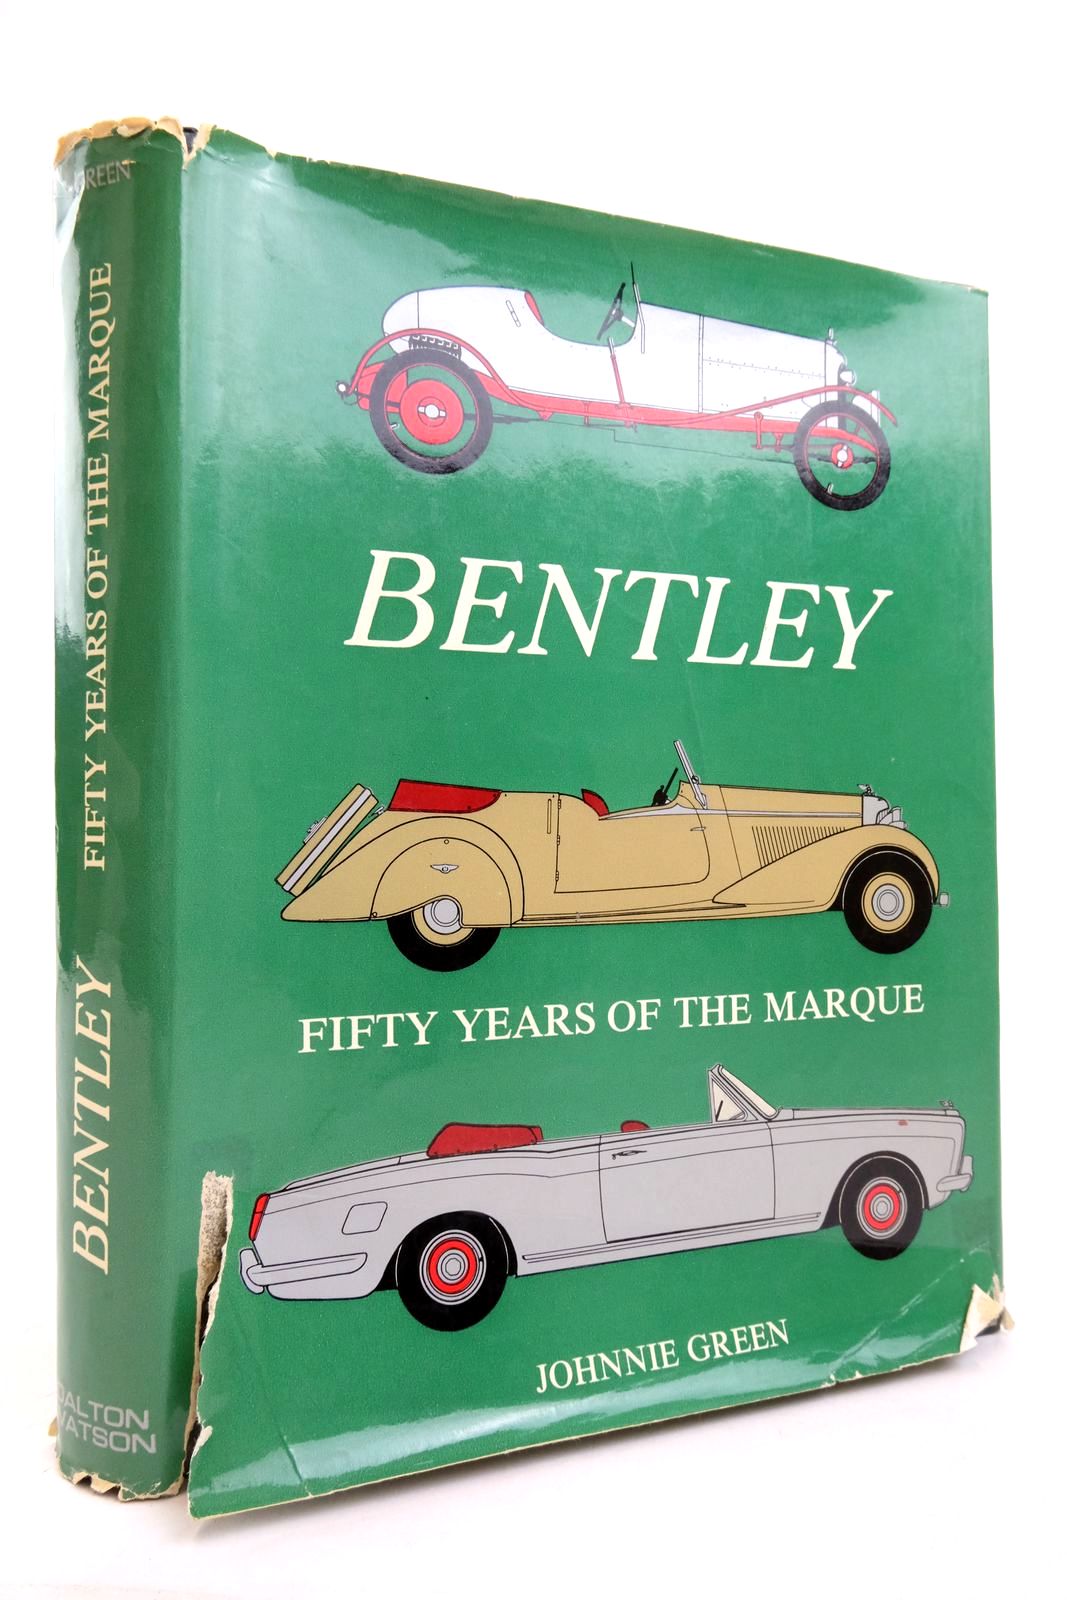 Photo of BENTLEY FIFTY YEARS OF THE MARQUE written by Green, Johnnie published by Dalton Watson (STOCK CODE: 2136811)  for sale by Stella & Rose's Books